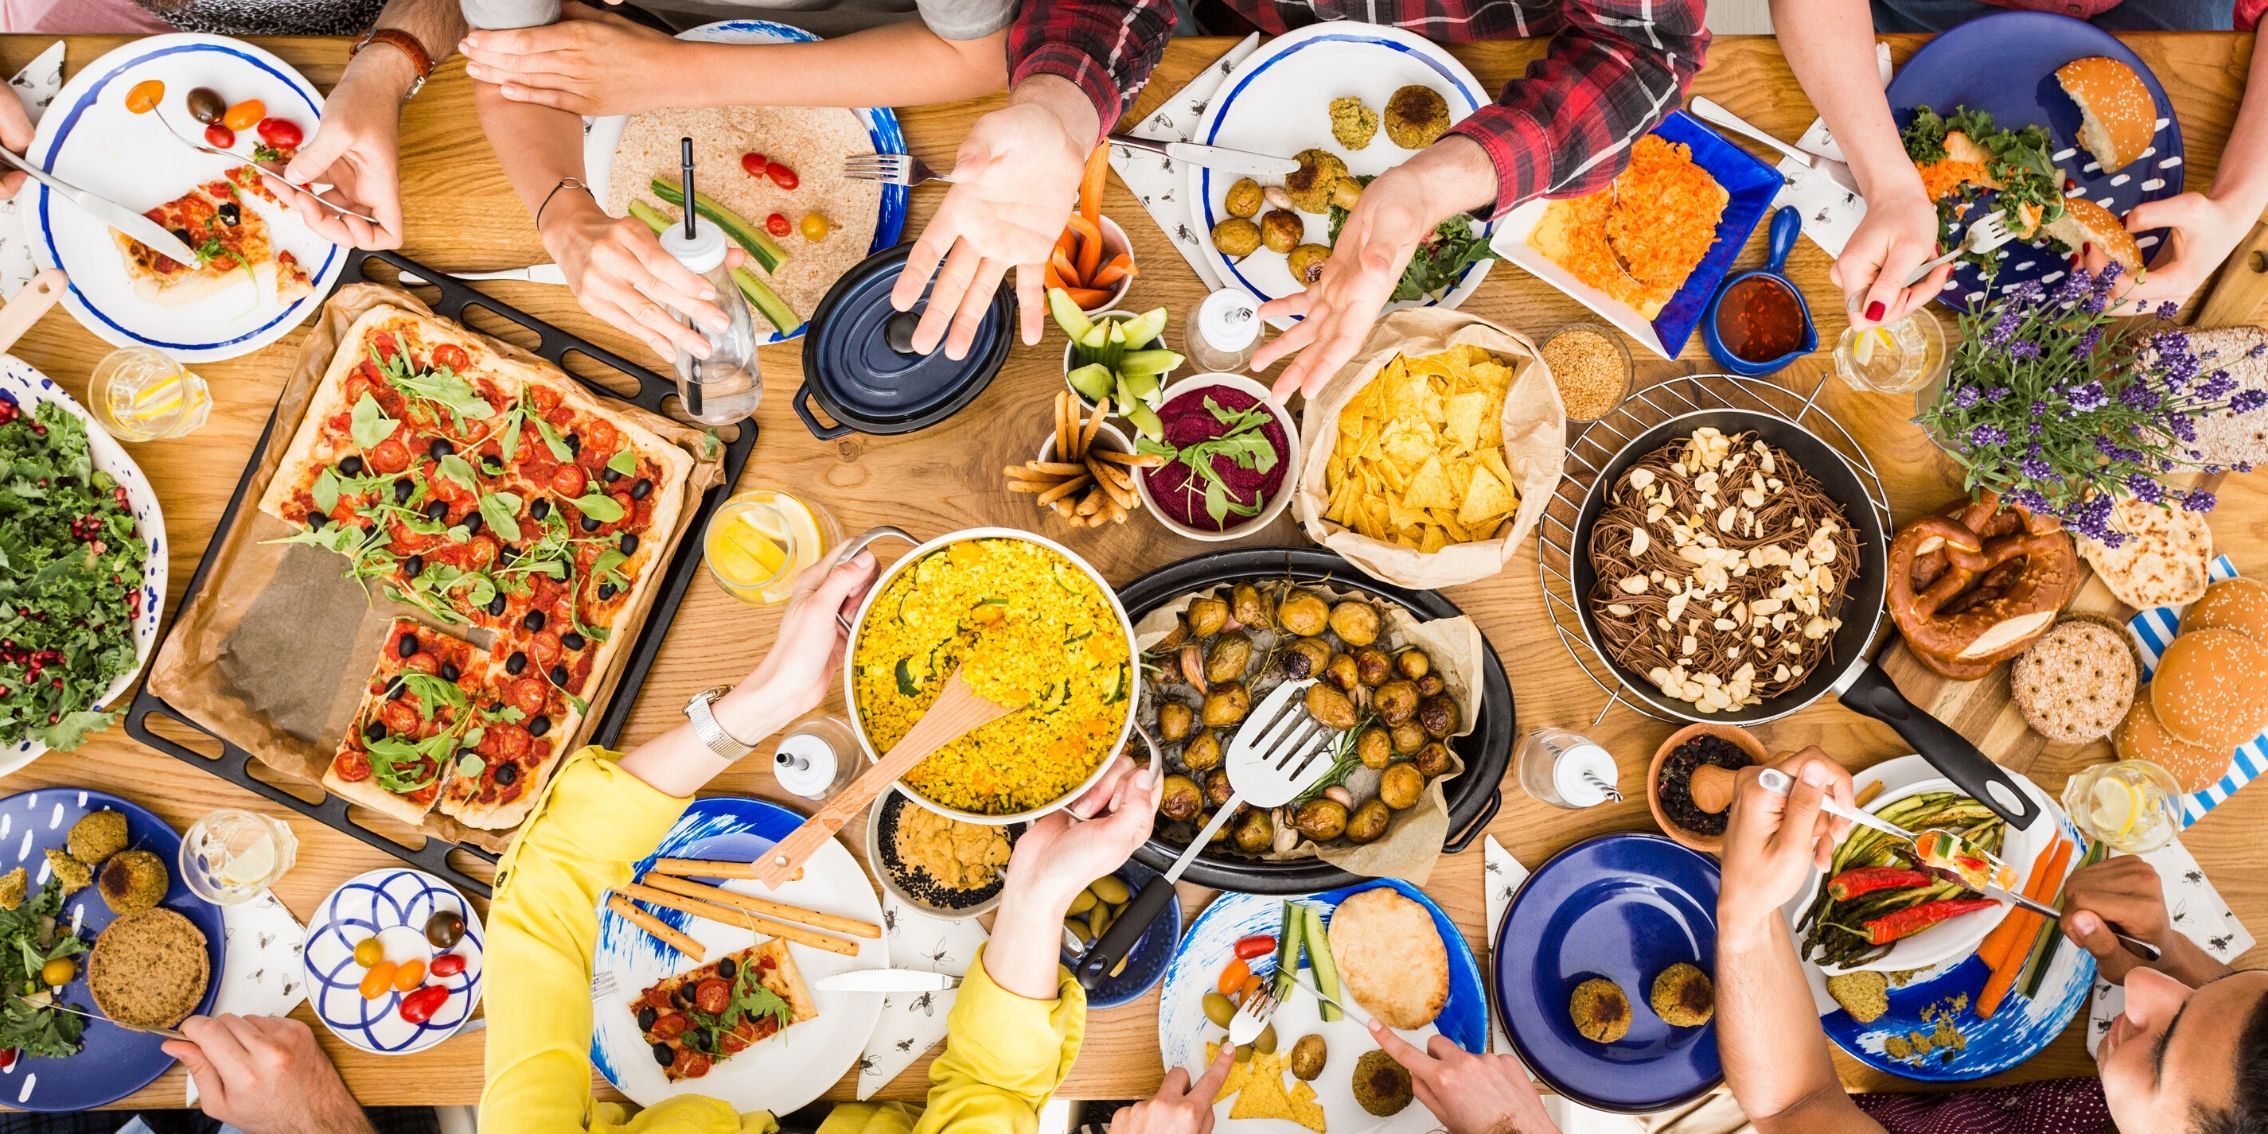 How Sharing Meals With Others Improves Health and Happiness - Live Life